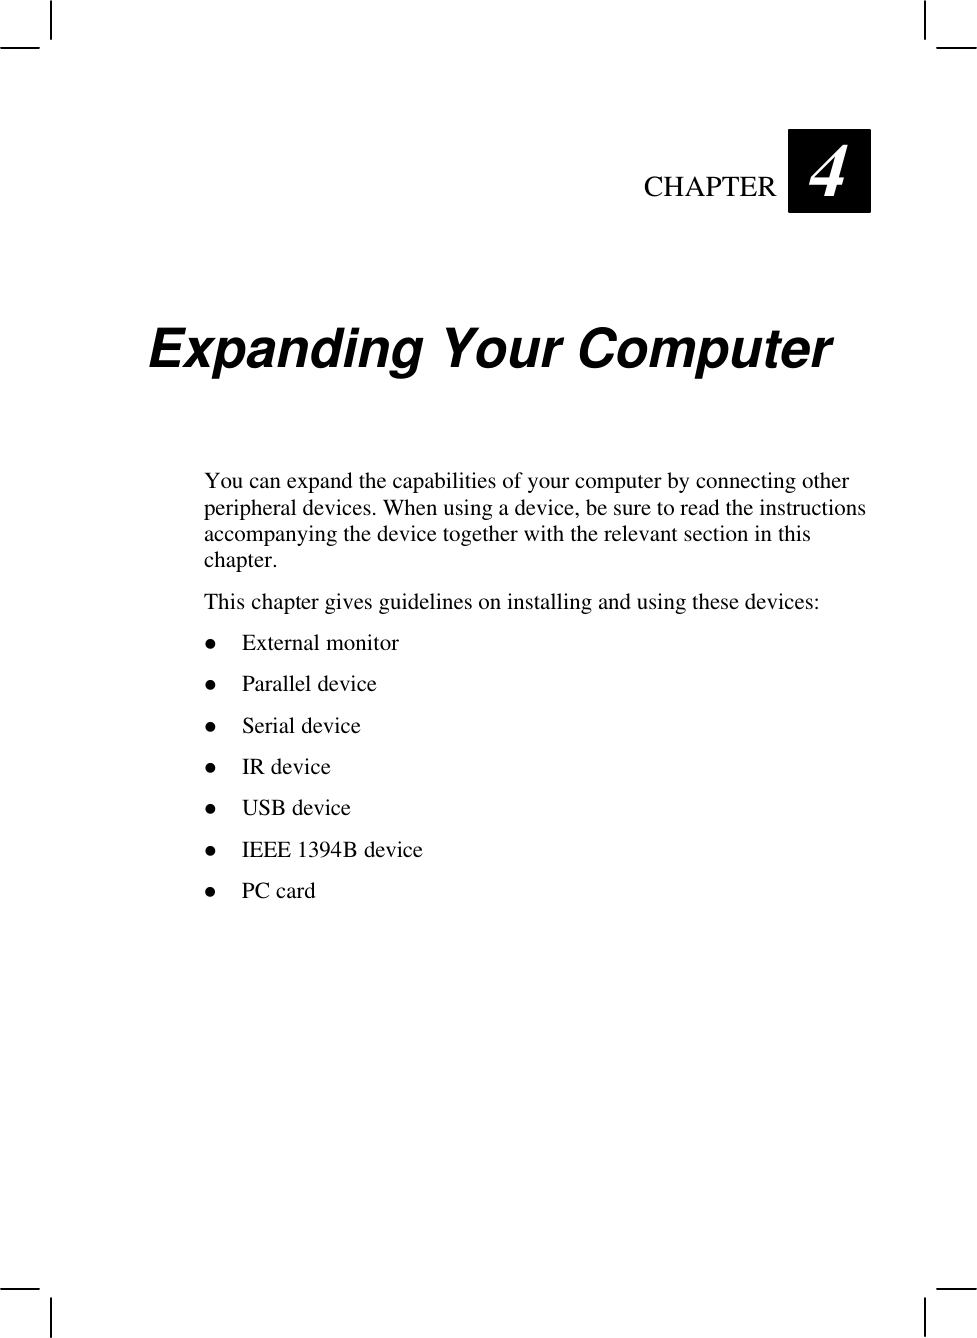   CHAPTER 4 Expanding Your Computer You can expand the capabilities of your computer by connecting other peripheral devices. When using a device, be sure to read the instructions accompanying the device together with the relevant section in this chapter. This chapter gives guidelines on installing and using these devices: l External monitor l Parallel device l Serial device l IR device l USB device l IEEE 1394B device l PC card  